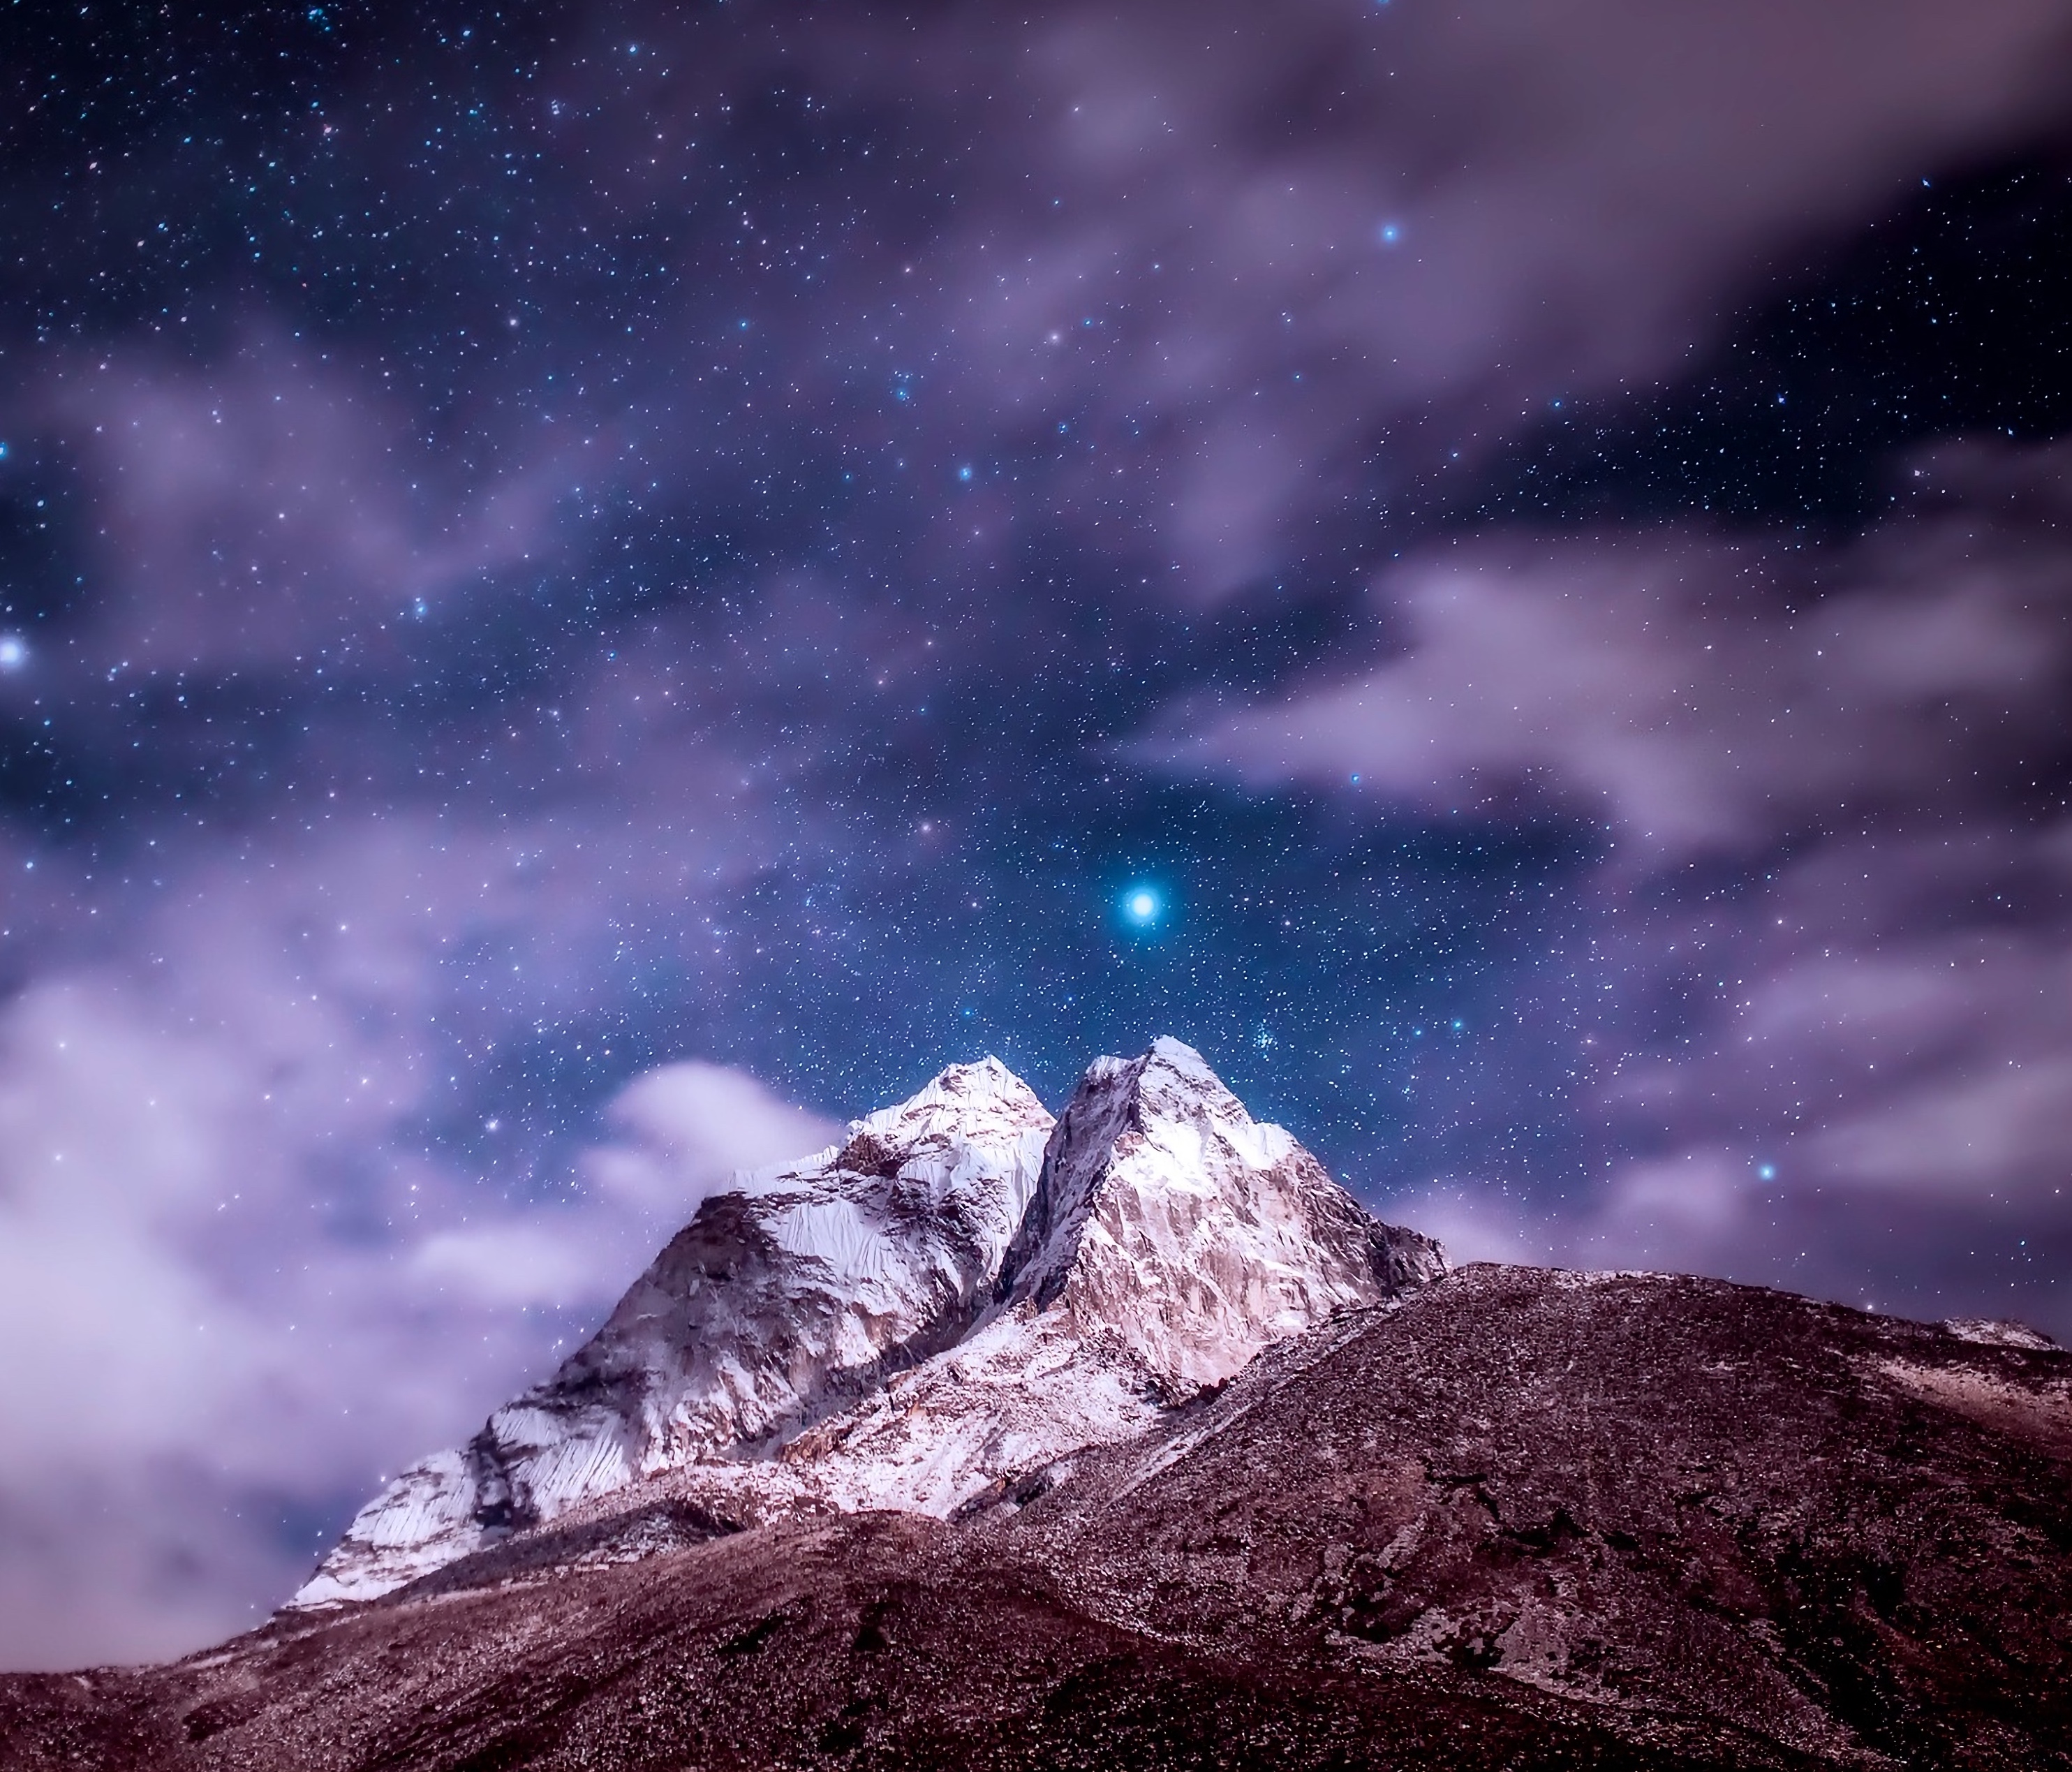 78195 download wallpaper nature, mountains, clouds, vertex, top, starry sky, snow covered, snowbound, himalayas screensavers and pictures for free